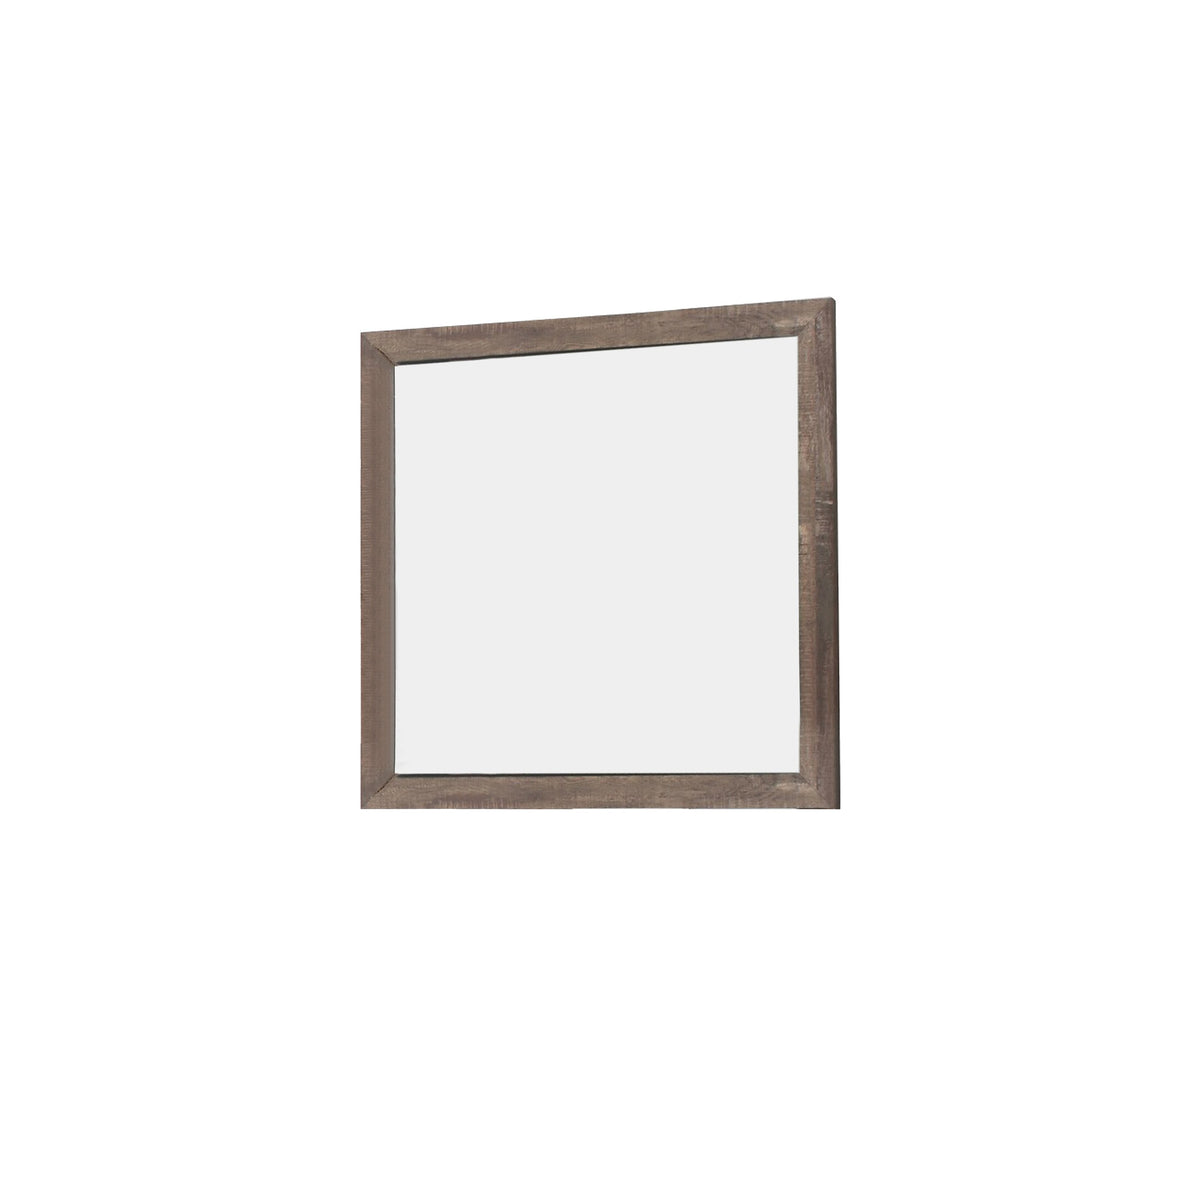 Transitional Square Shape Wooden Frame Mirror with Textured Details, Brown - BM219990